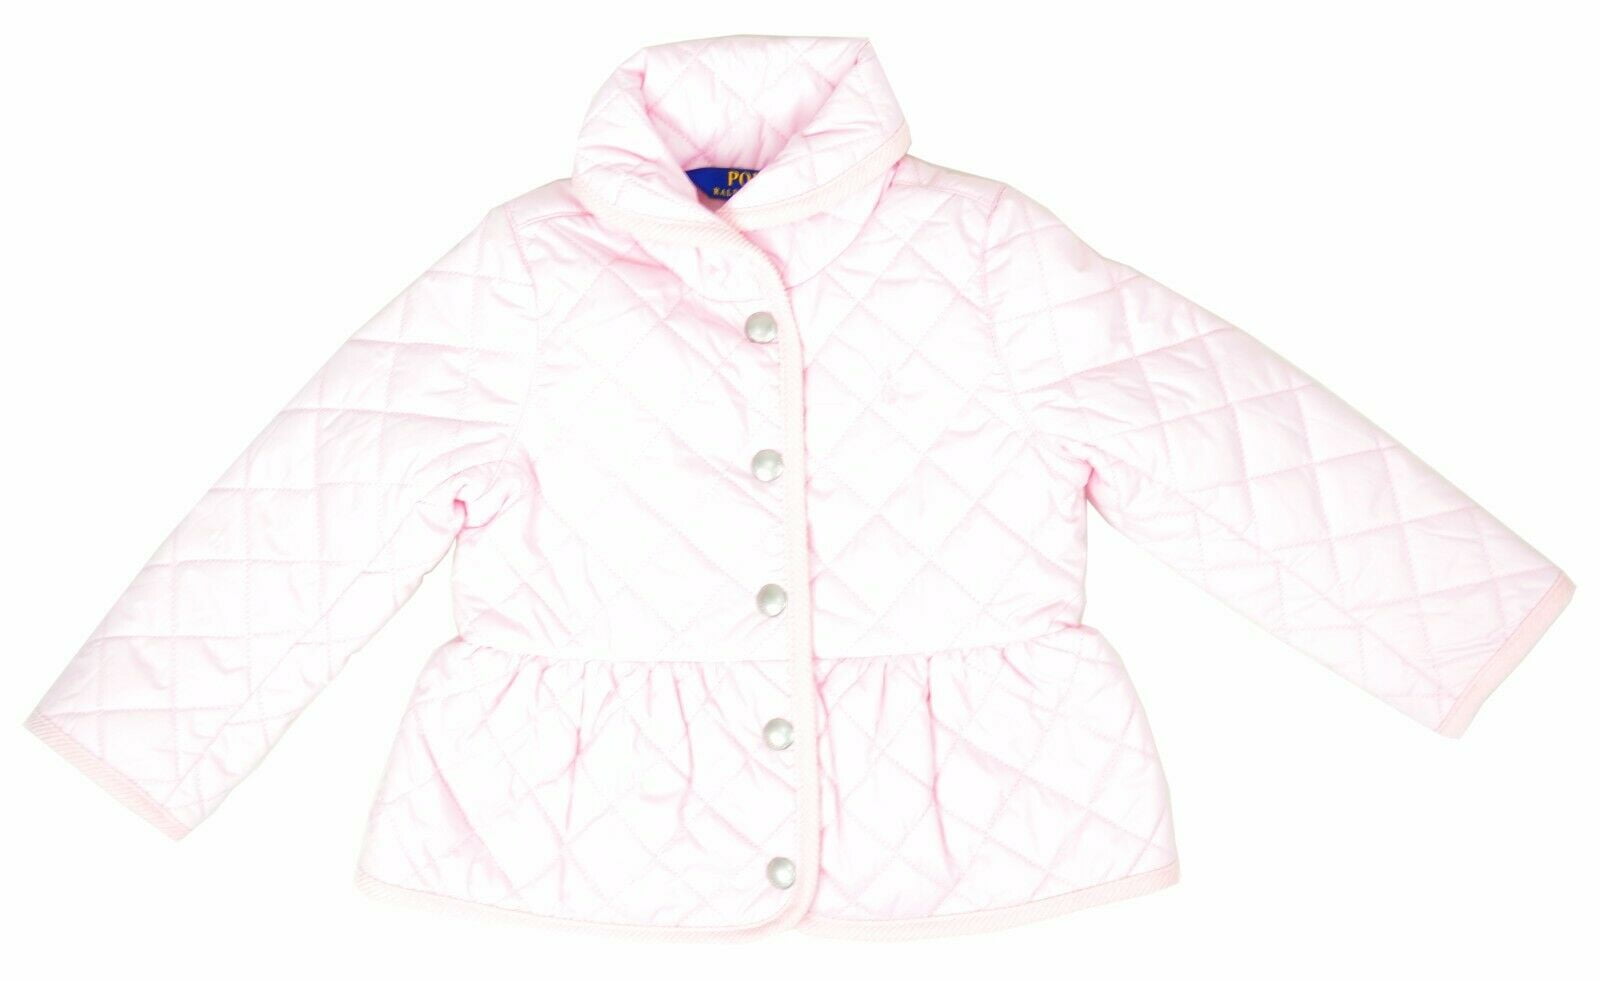 New Polo Ralph Lauren Baby Girls Quilted Barn Jacket, Pink, Size 6X, 9739-1  